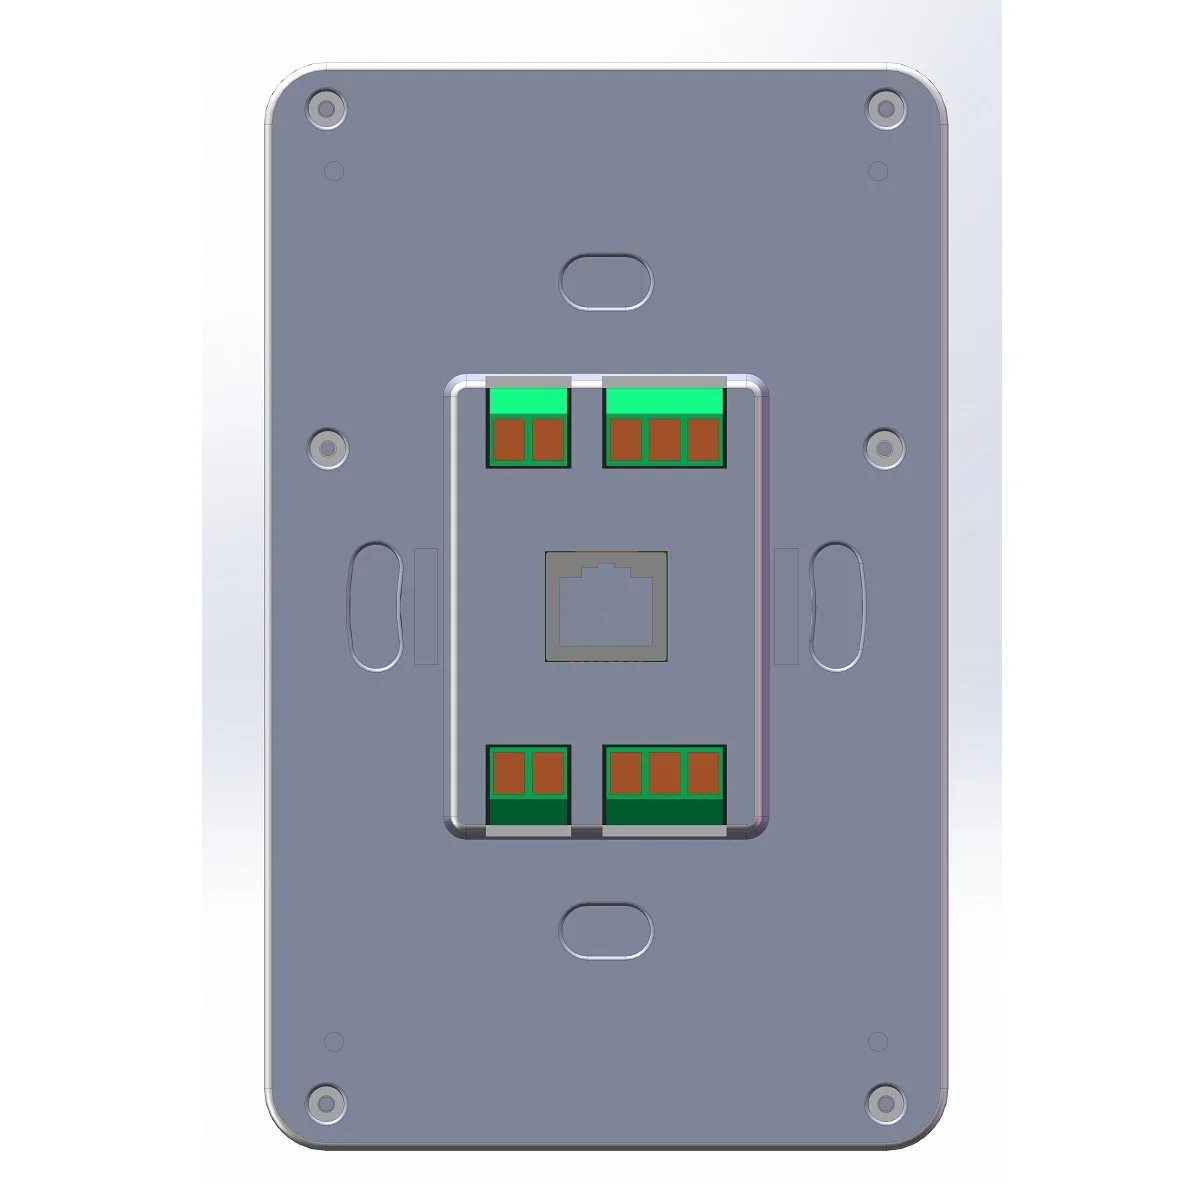 Wall Lock Mounted Android Tablet With Zigbee Coordinator, PoE Power And Proximity Sensor For Smart Home